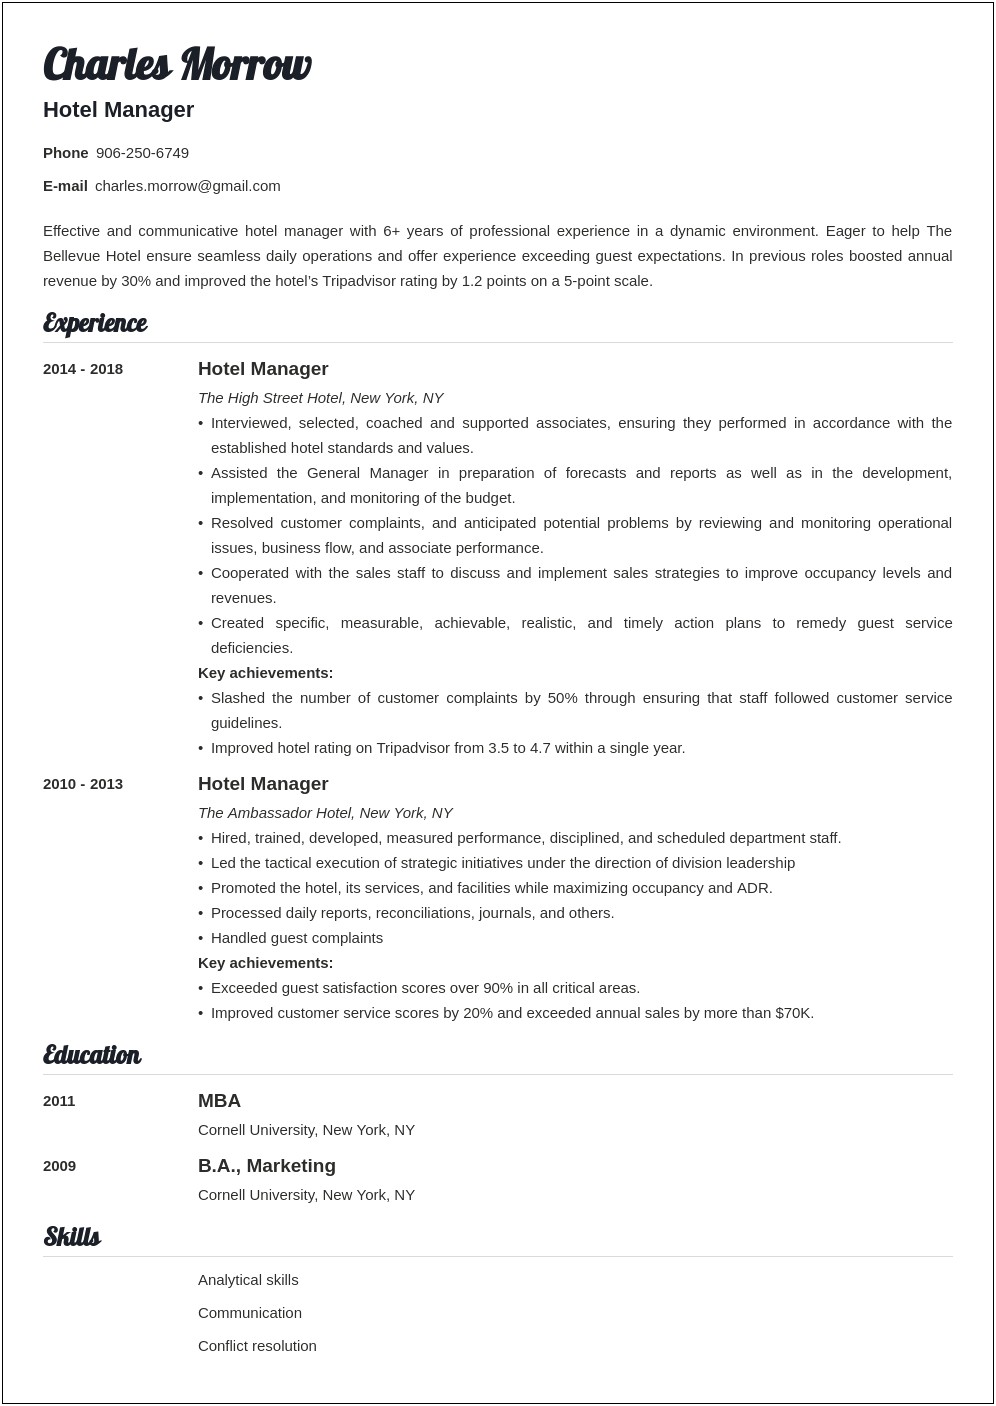 Resume Format For Hotel Management Experience